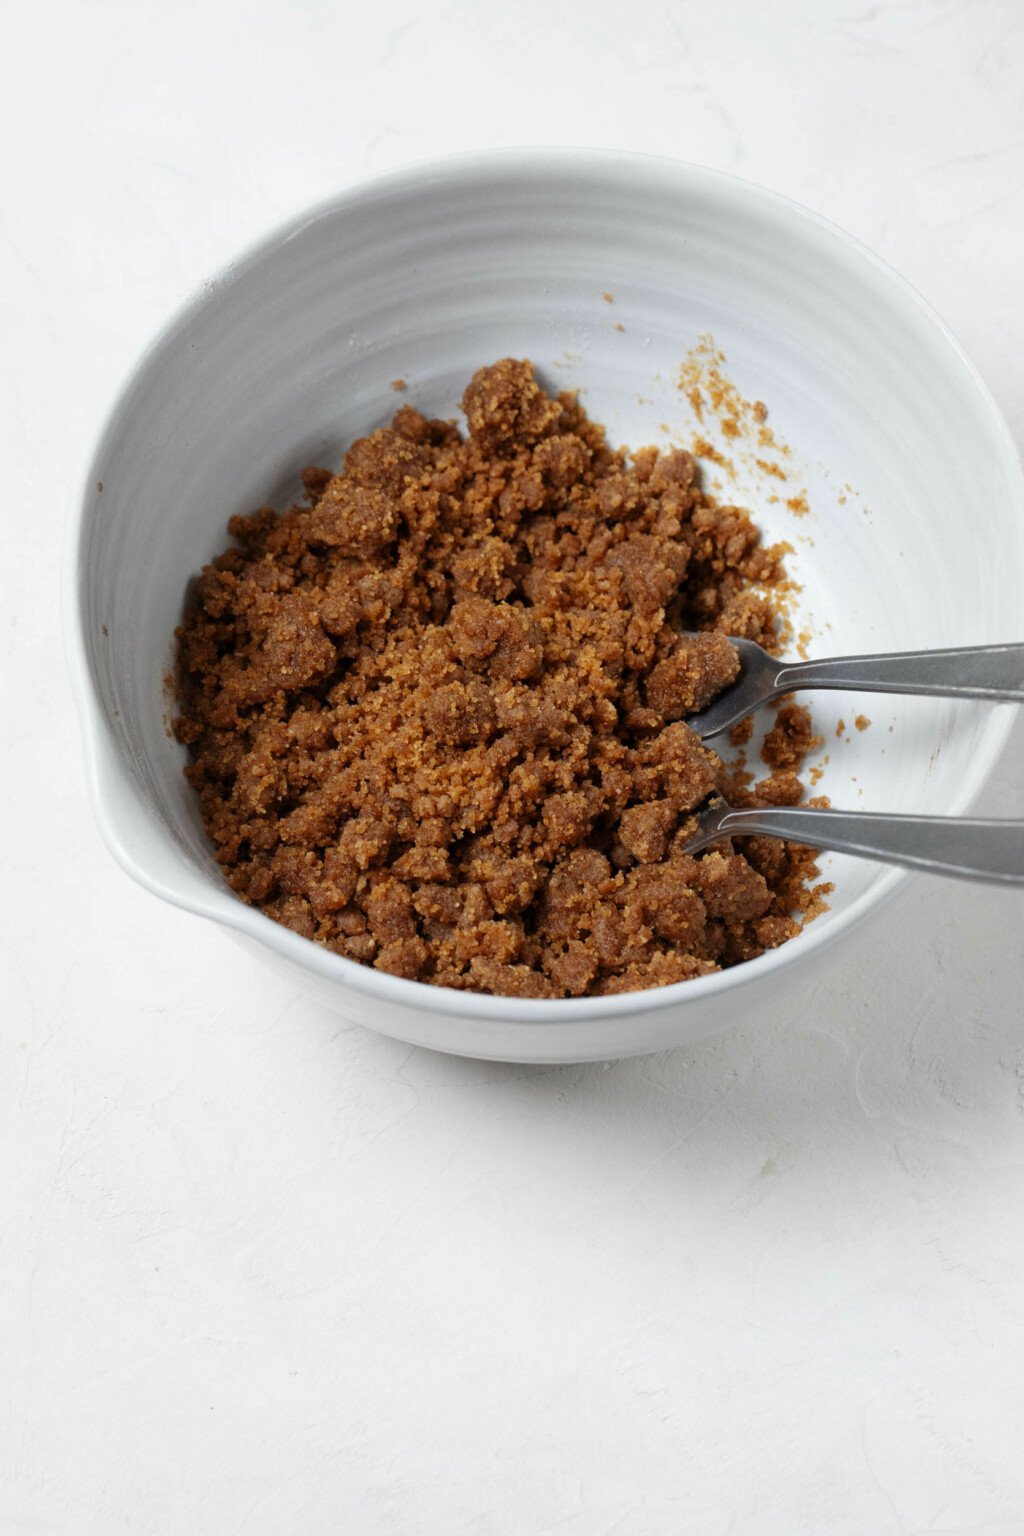 A white, ceramic mixing bowl is filled with a vegan streusel topping. The topping is made with dark brown sugar and has big crumbs. Two forks peek out of the bowl.